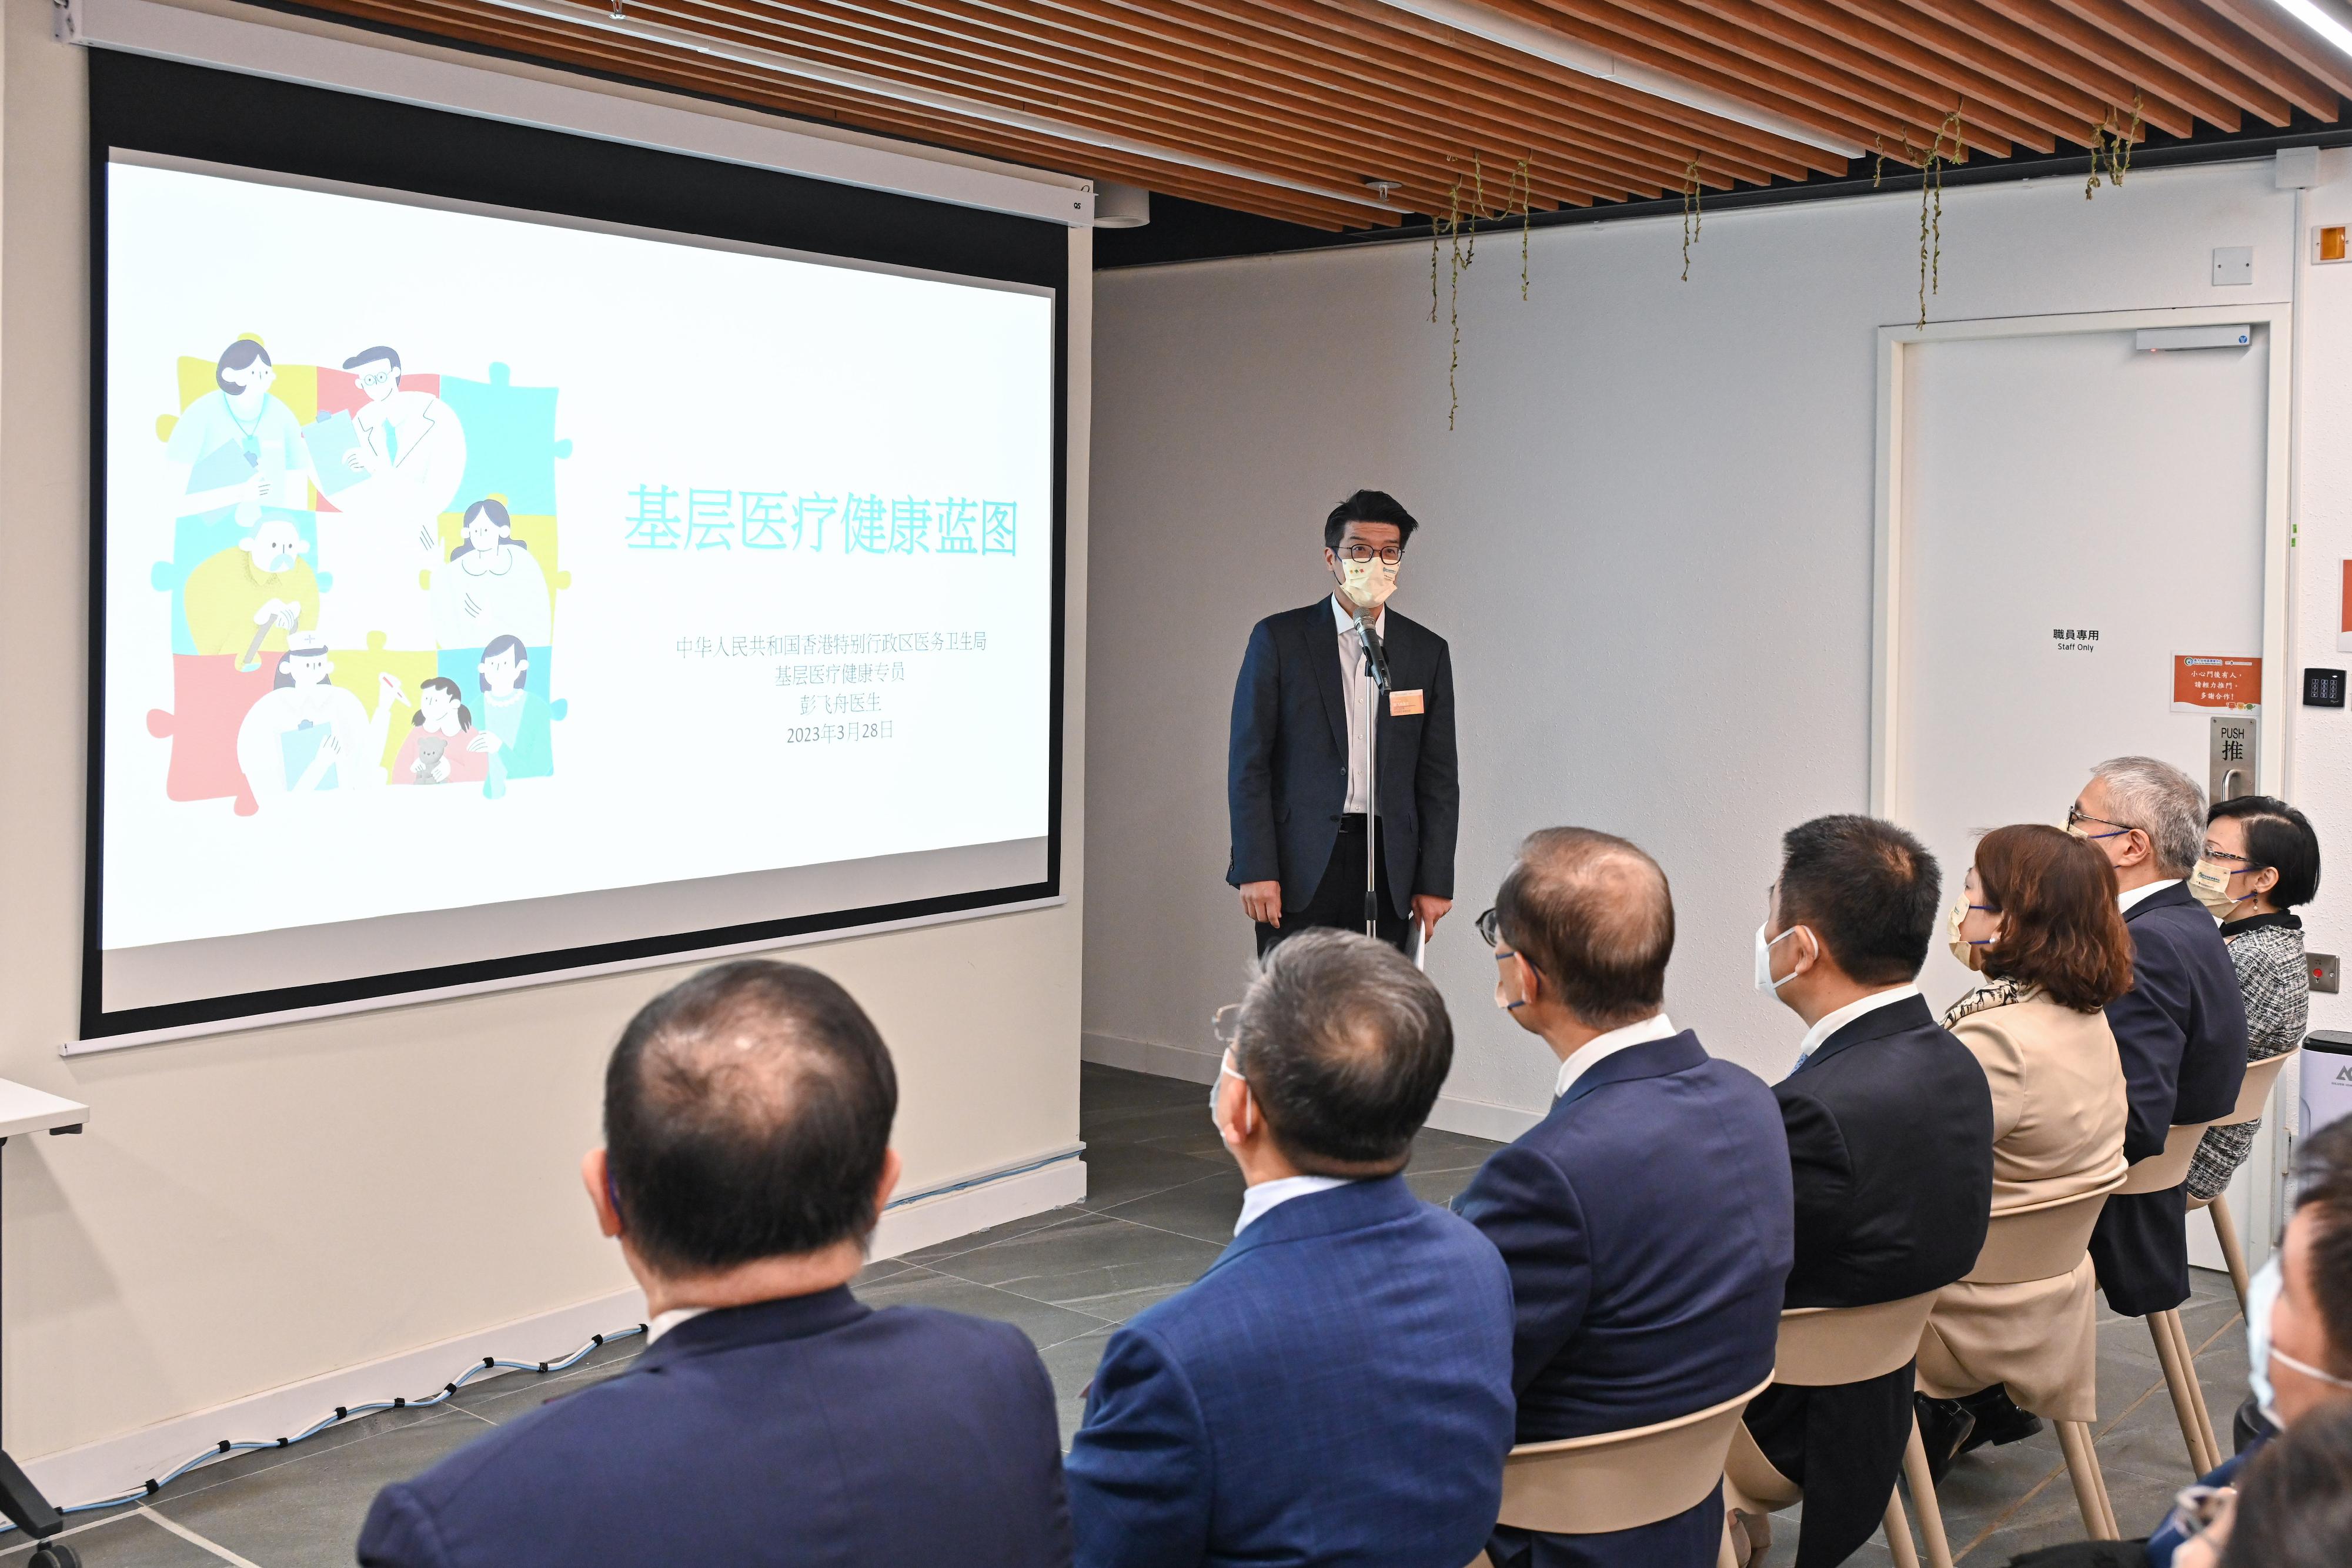 The National Health Commission delegation visited the Wong Tai Sin District Health Centre today (March 28). Photo shows the Commissioner for Primary Healthcare, Dr Pang Fei-chau, elaborating on the specific strategies and reform directions of the Primary Healthcare Blueprint to the delegation.